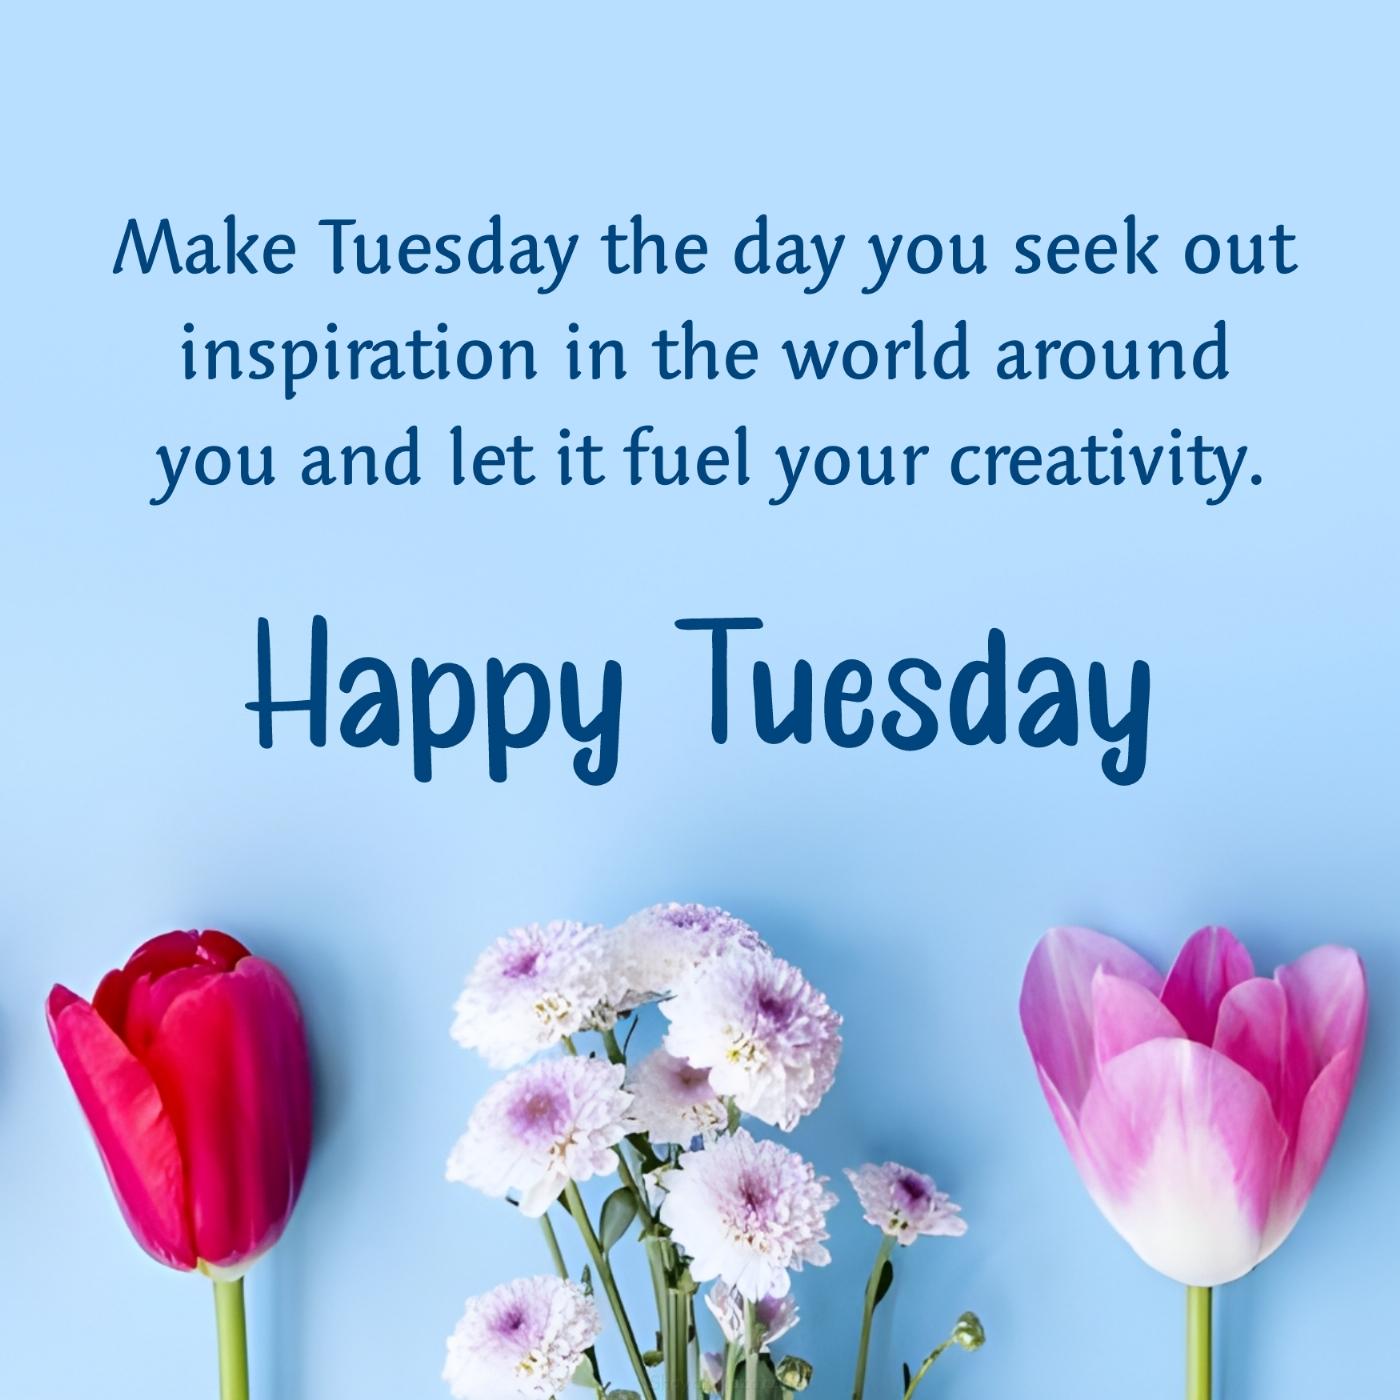 Make Tuesday the day you seek out inspiration in the world around you